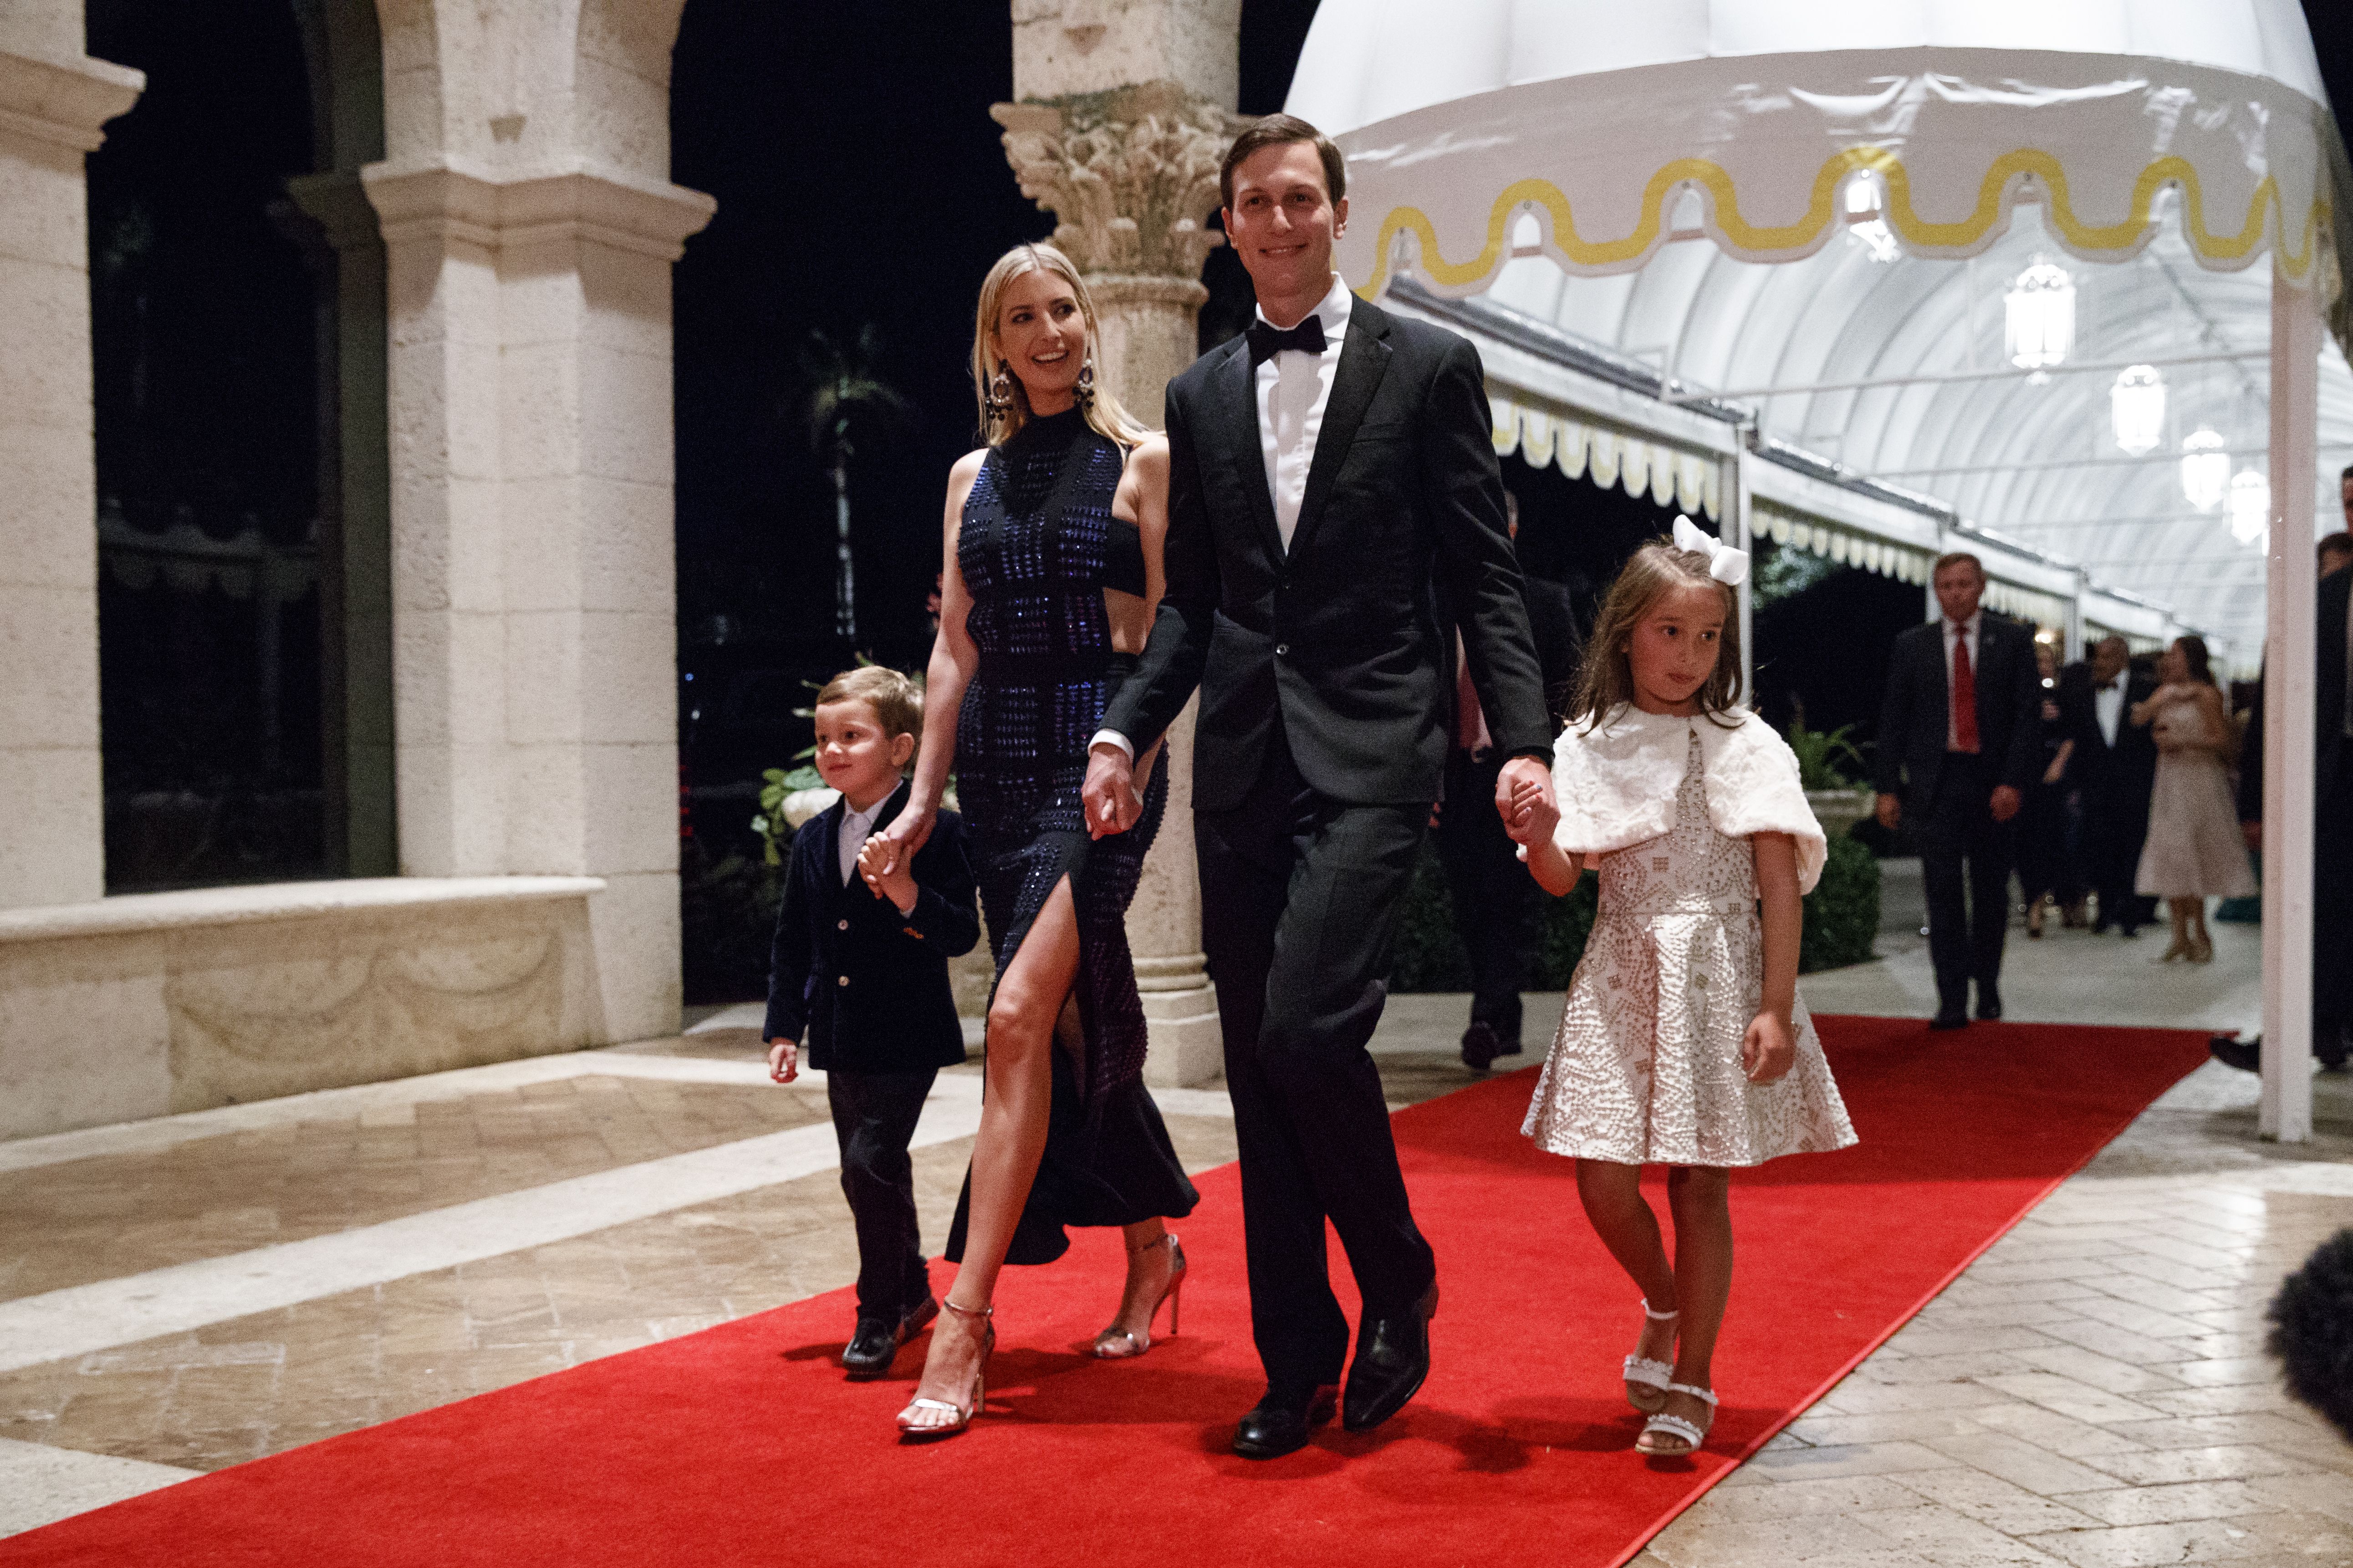 Jared Kushner and Ivanka Trump arrive with daughter Arabella Kushner and son Joseph Kushner for a New Year's Eve gala at Mar-a-Lago, Sunday, Dec. 31, 2017, in Palm Beach, Fla. (AP Photo/Evan Vucci)